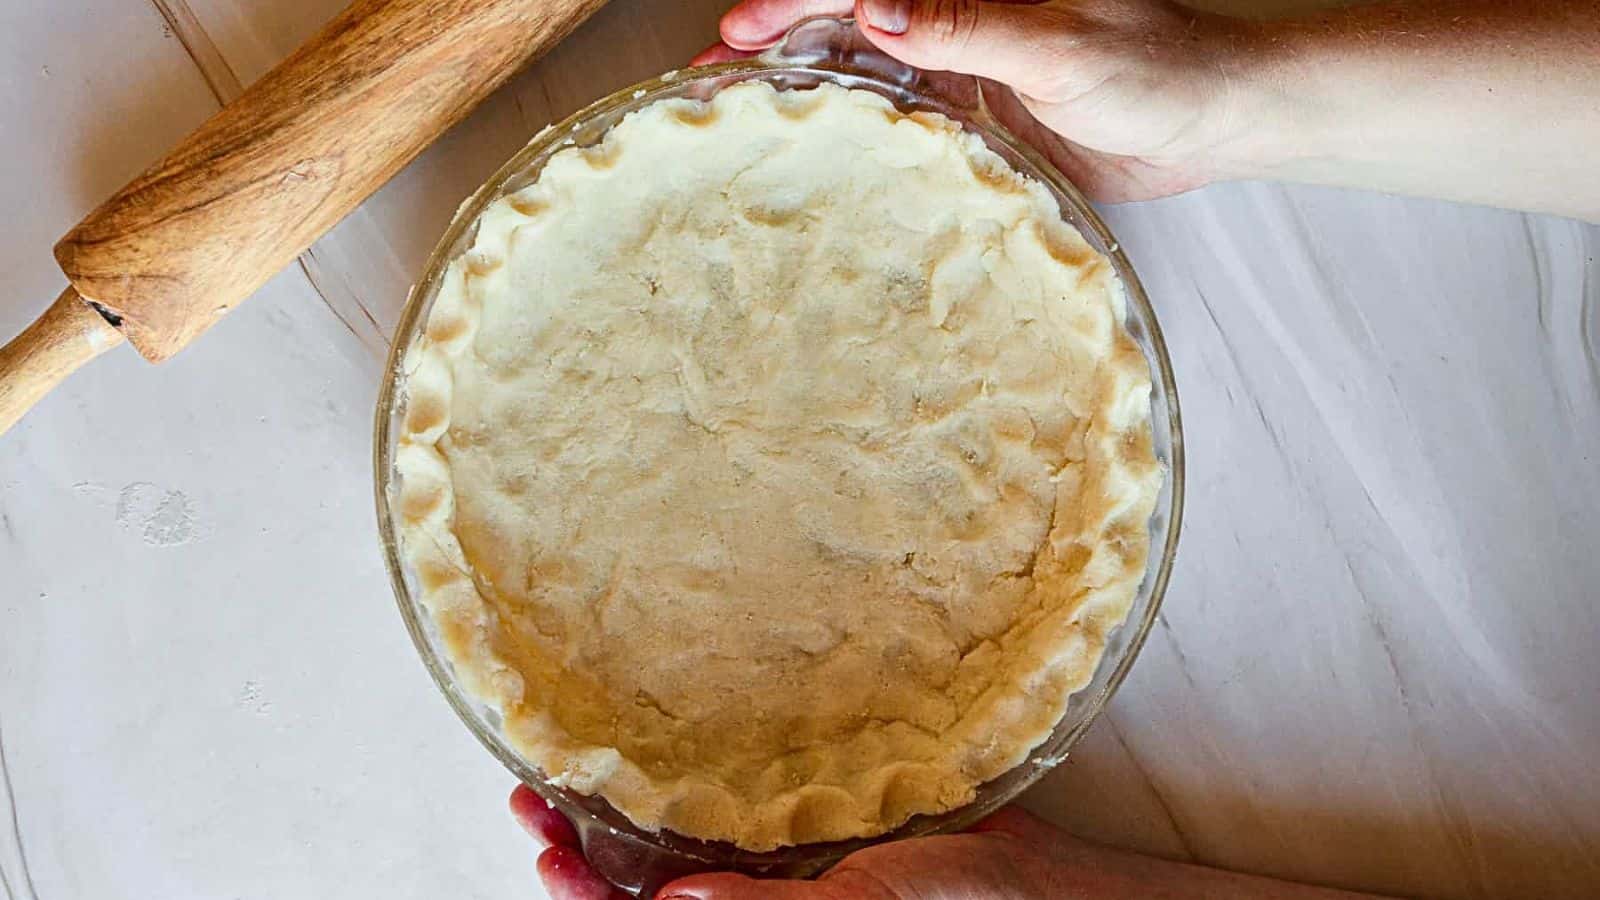 A person rolling out a pie crust in a glass pan.